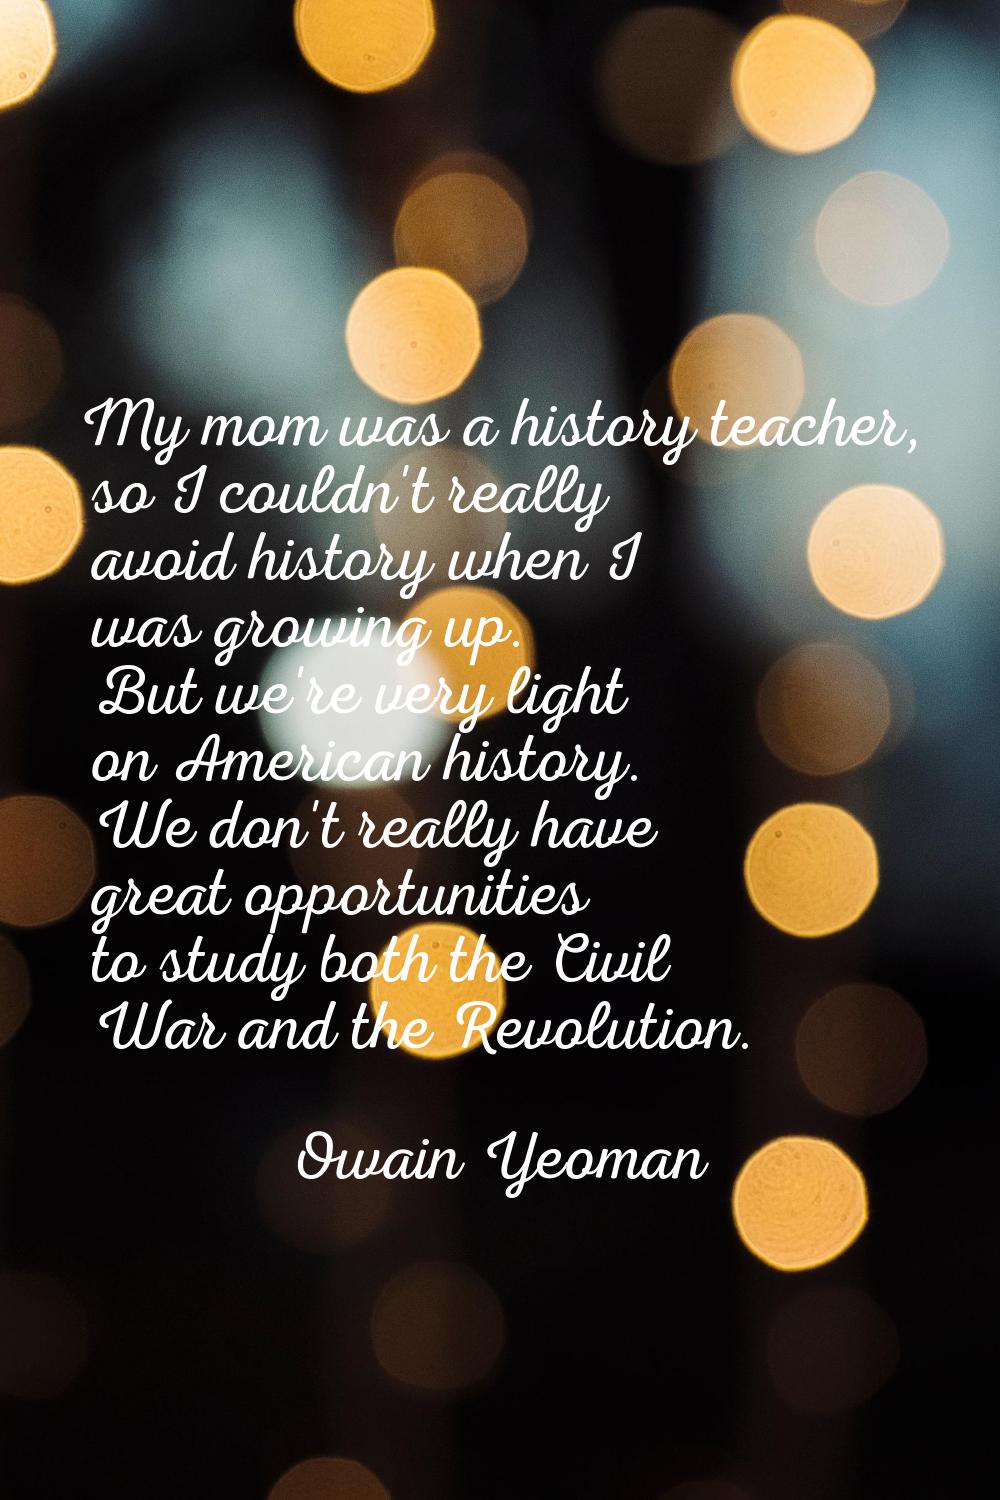 My mom was a history teacher, so I couldn't really avoid history when I was growing up. But we're v